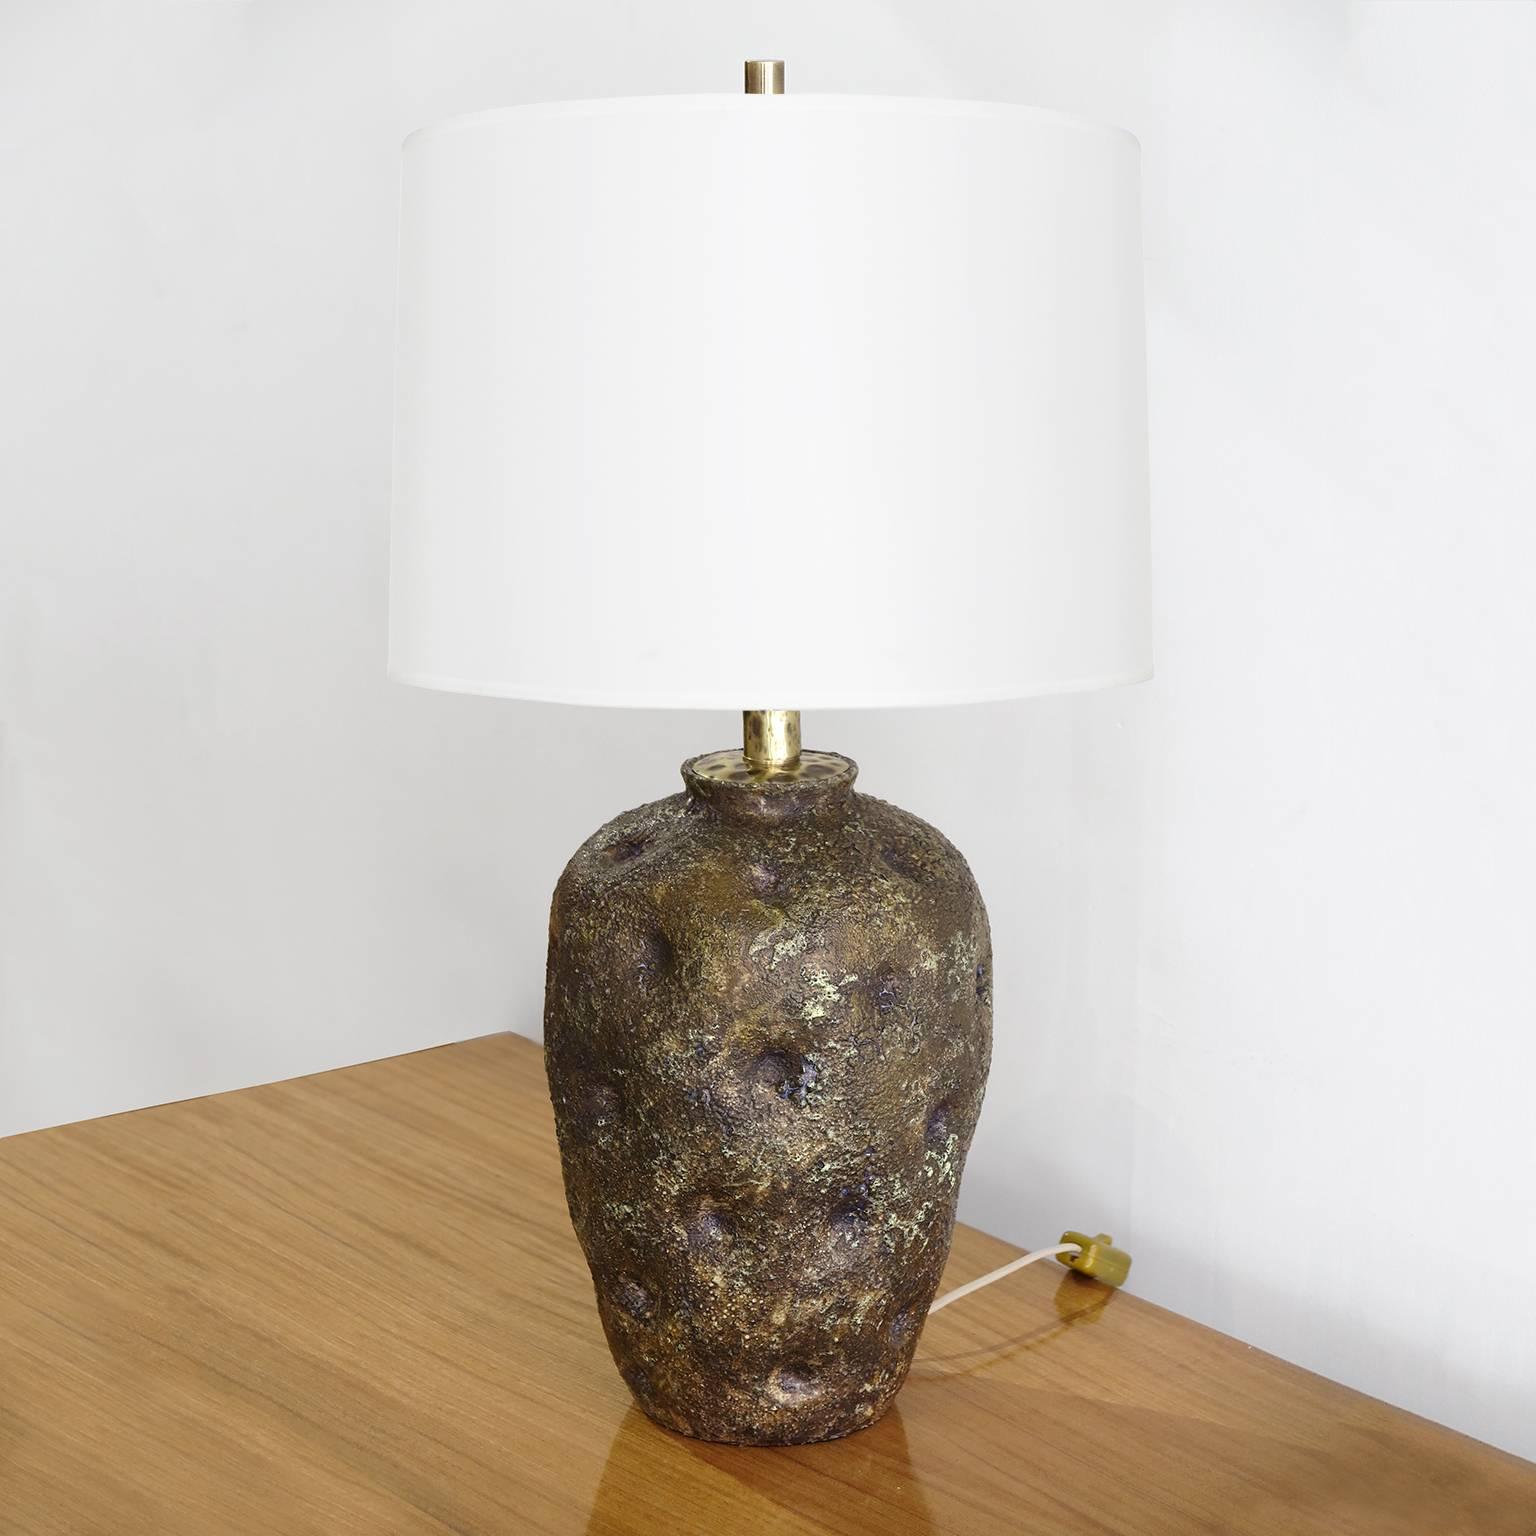 Italian Studio ceramic table lamp in brown with violet shades and gold glimmer by Marcello Fantoni (1915-2011) Italy, circa 1950.
Signed: Fantoni, Italy, Lammerti.
Newly rewired with double socket cluster.